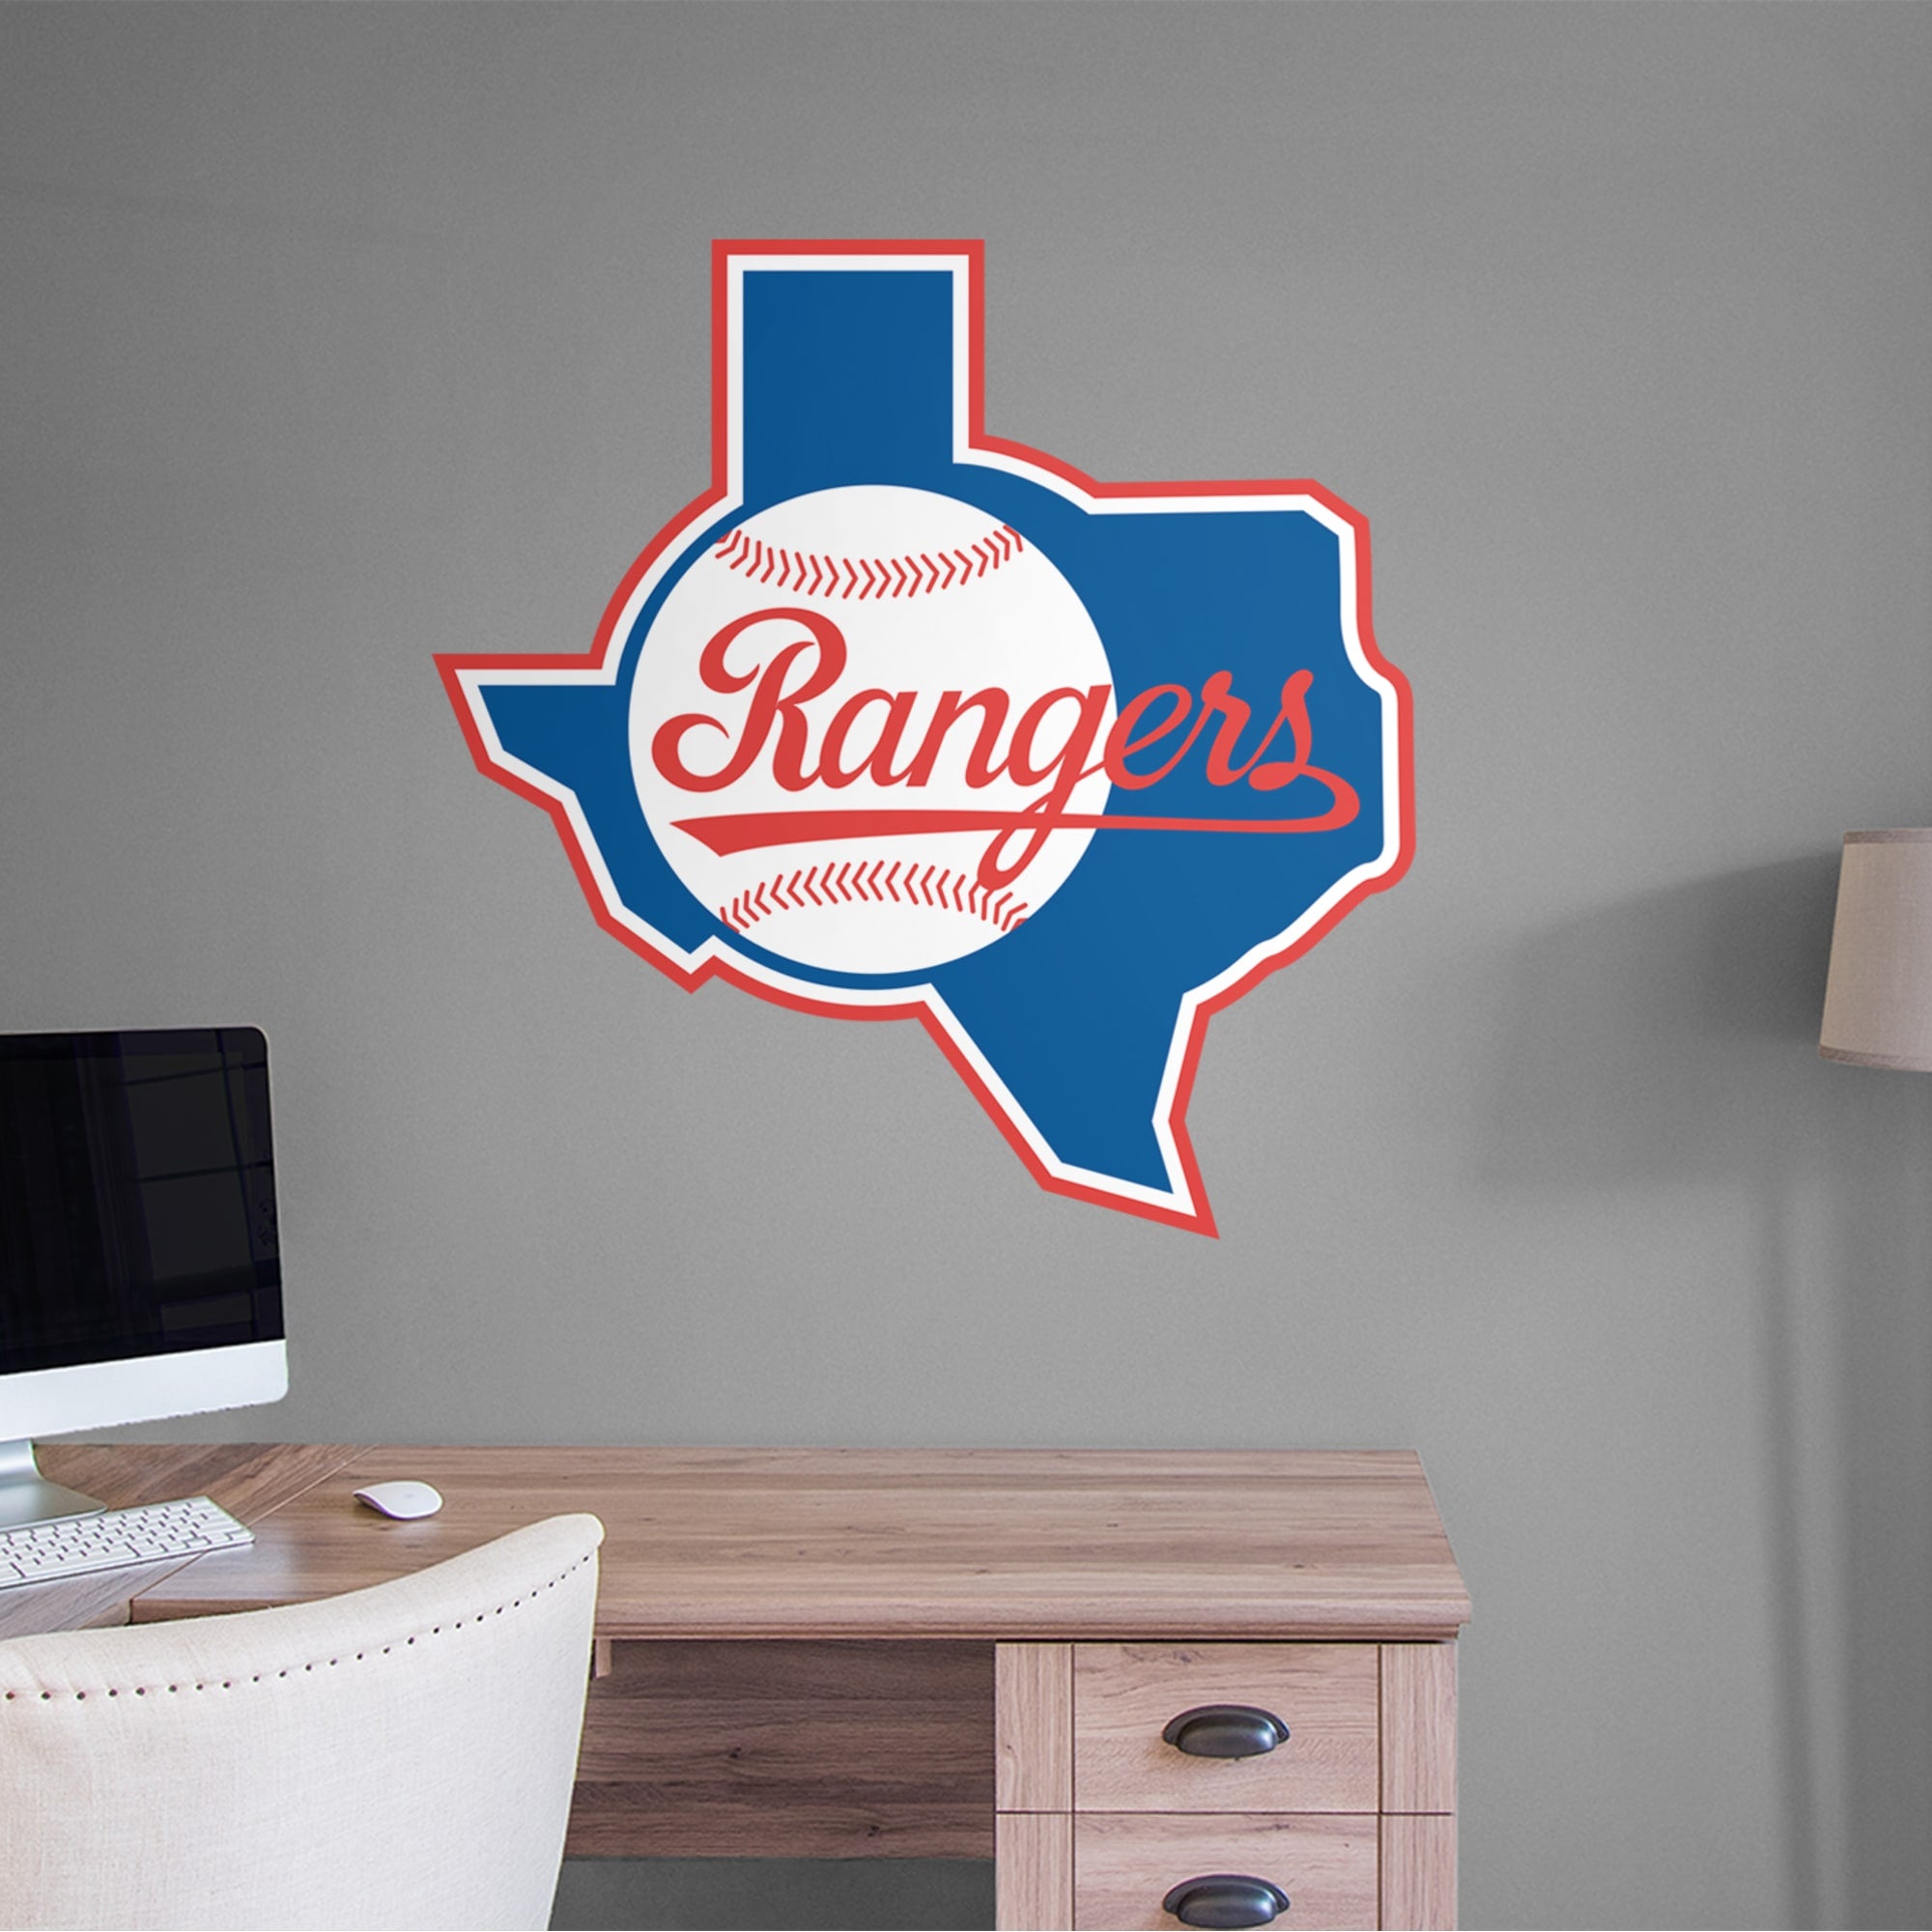 Texas Rangers: Classic Logo - Officially Licensed MLB Removable Wall Decal 38.0"W x 38.0"H by Fathead | Vinyl